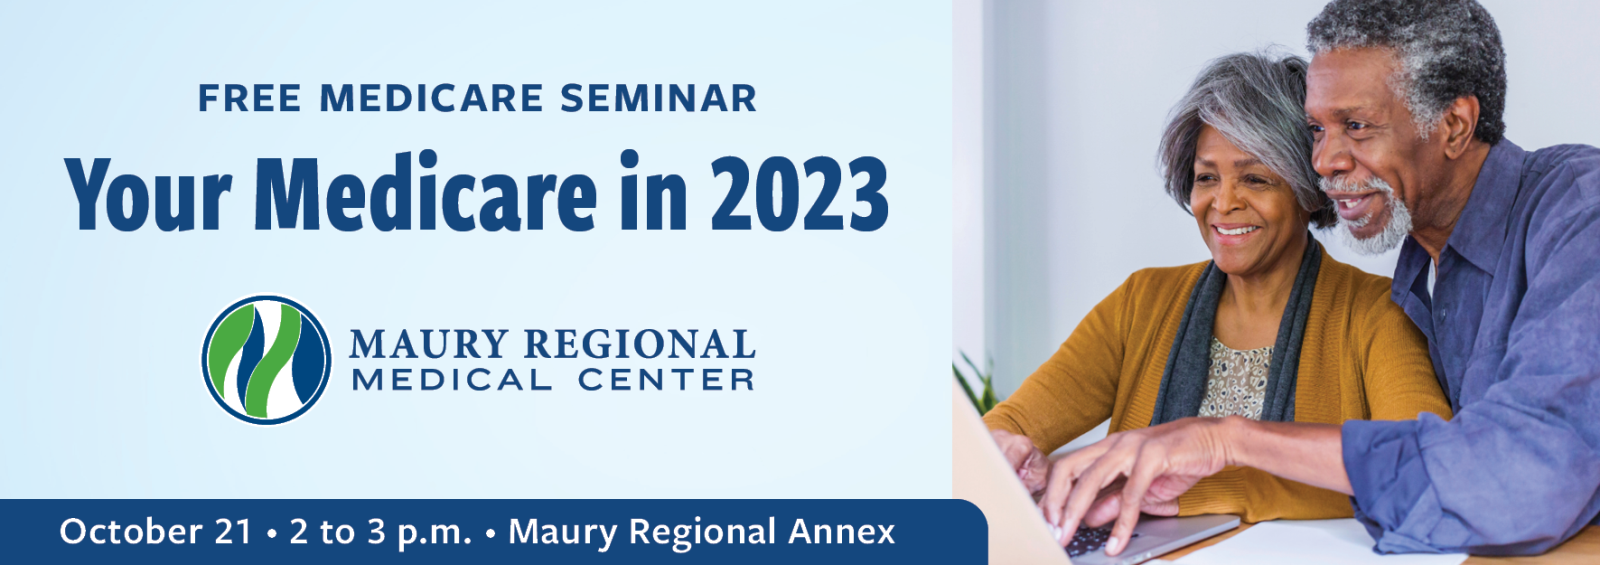 Text: "Free Medicare Seminar: Your Medicare in 2023."